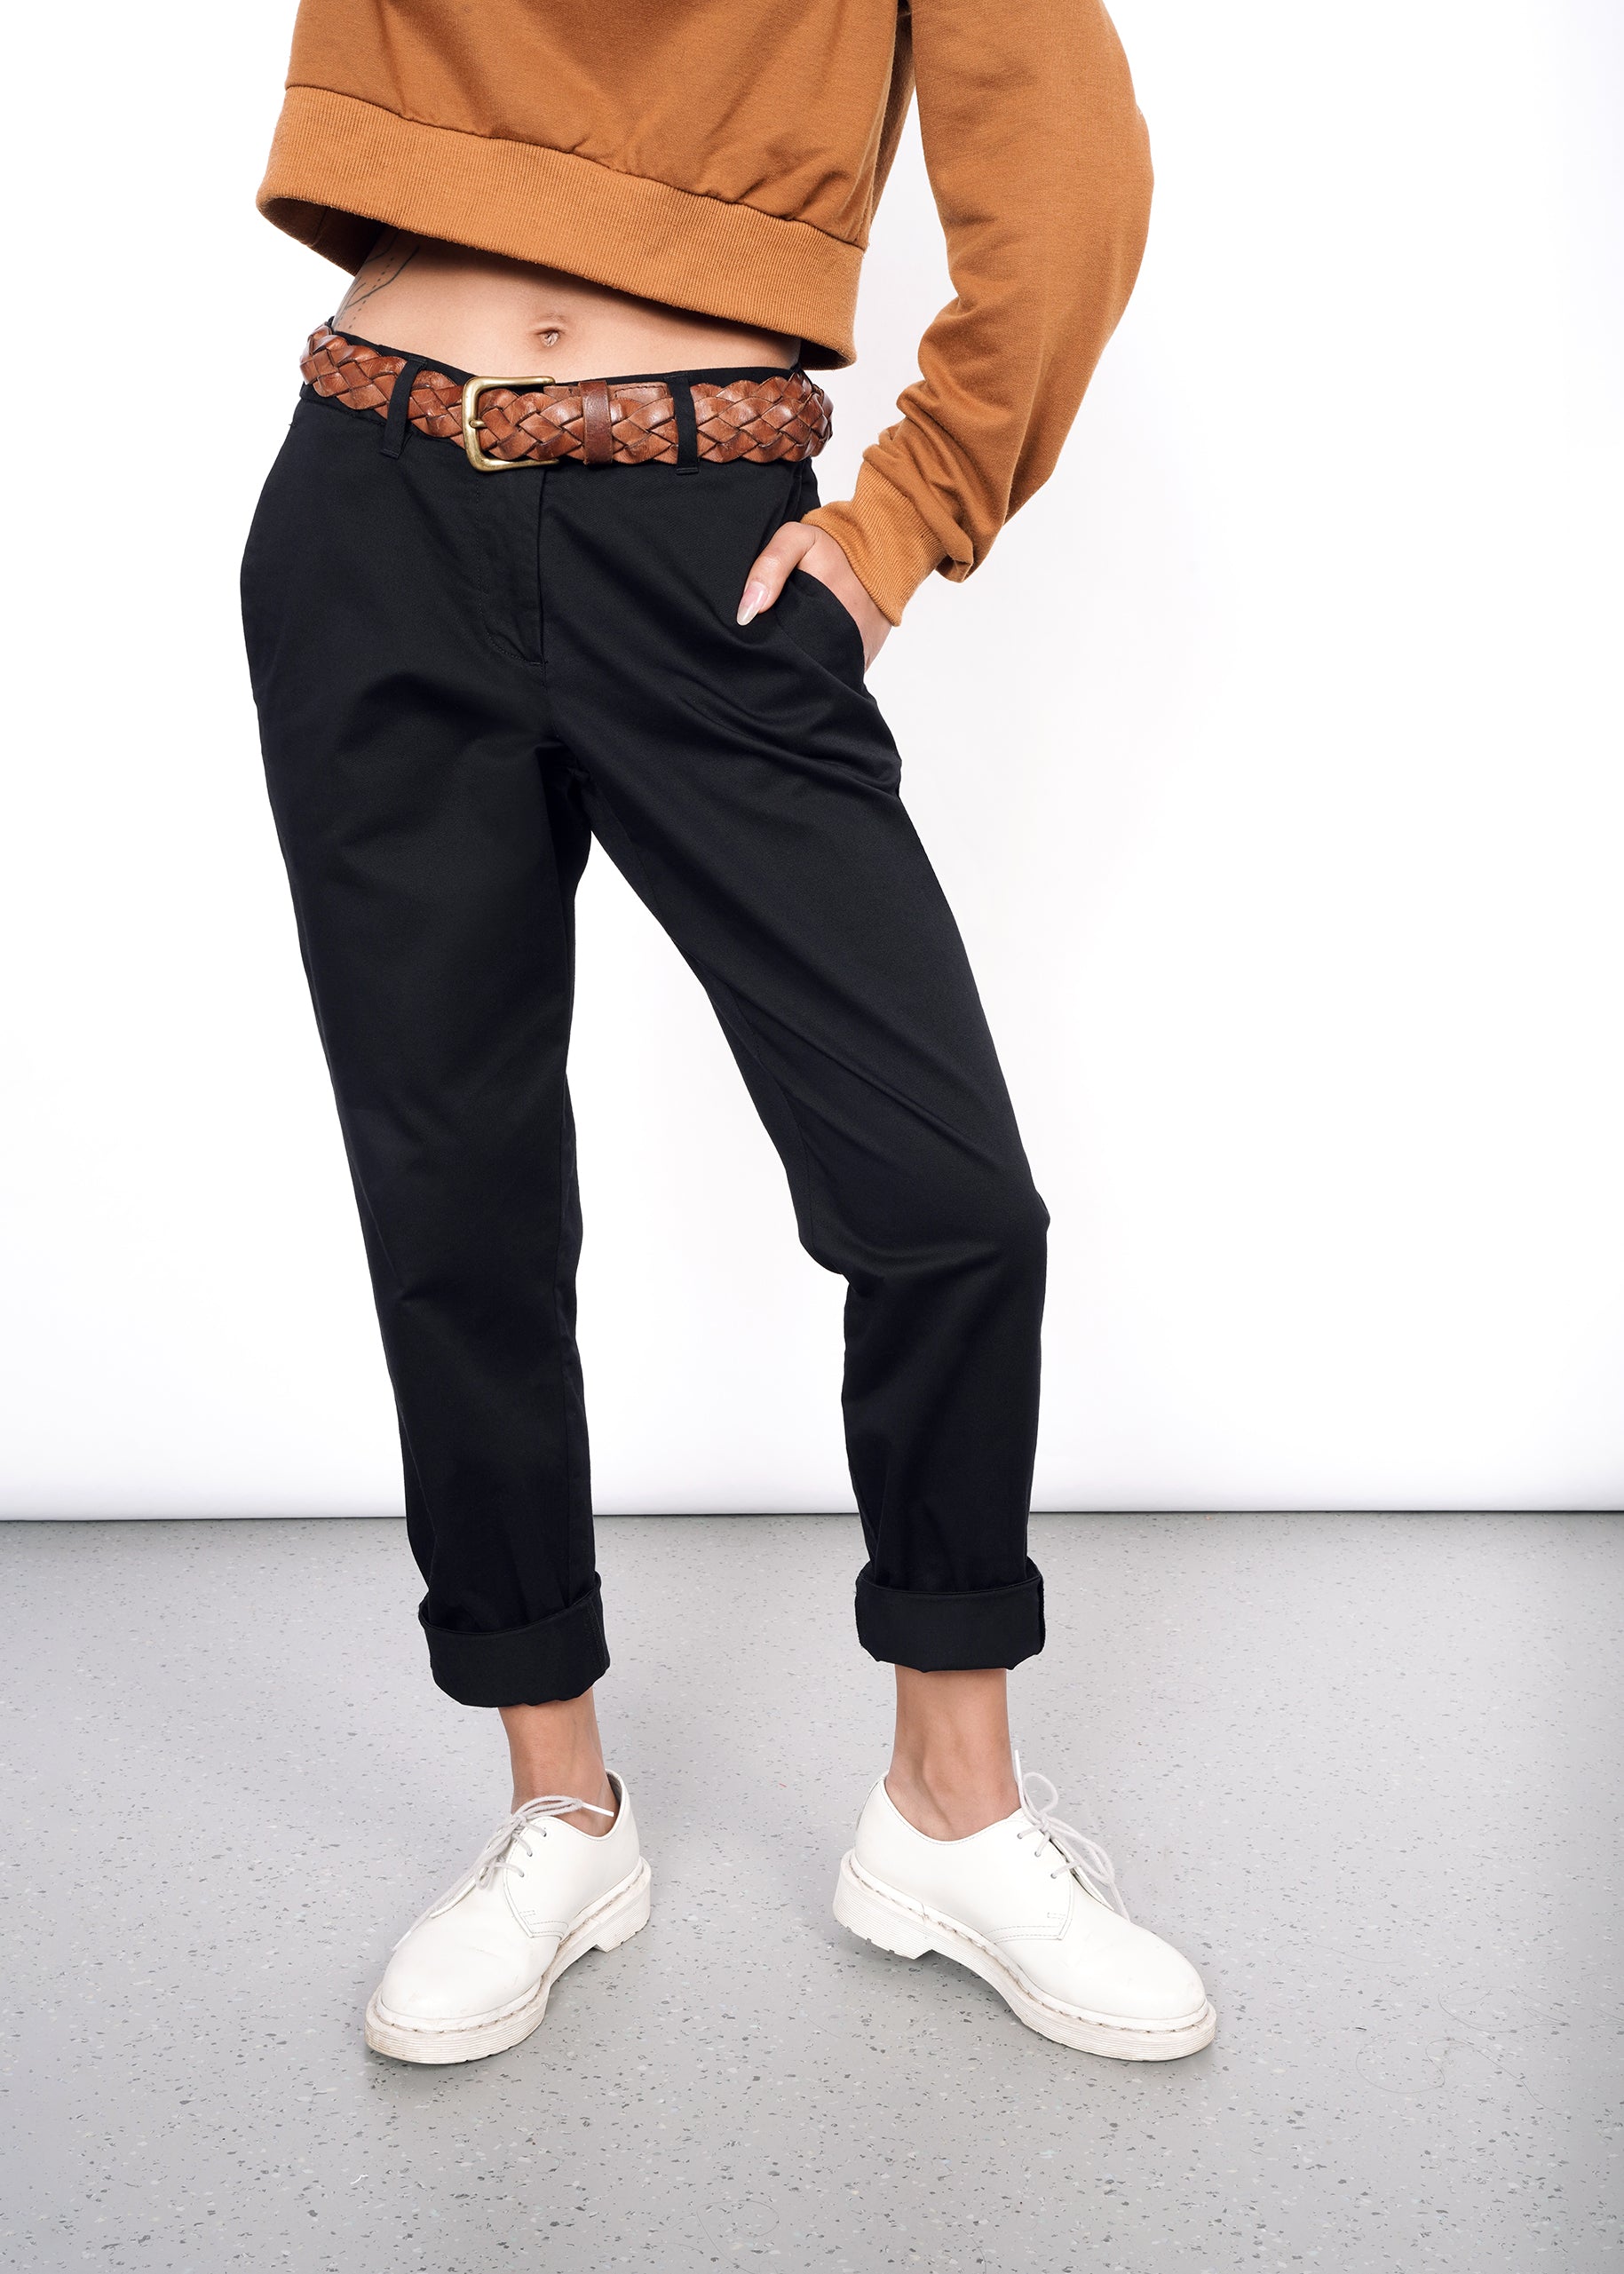 Model wearing black essential trouser pant in size 2, with hand in pocket and pant legs cuffed up